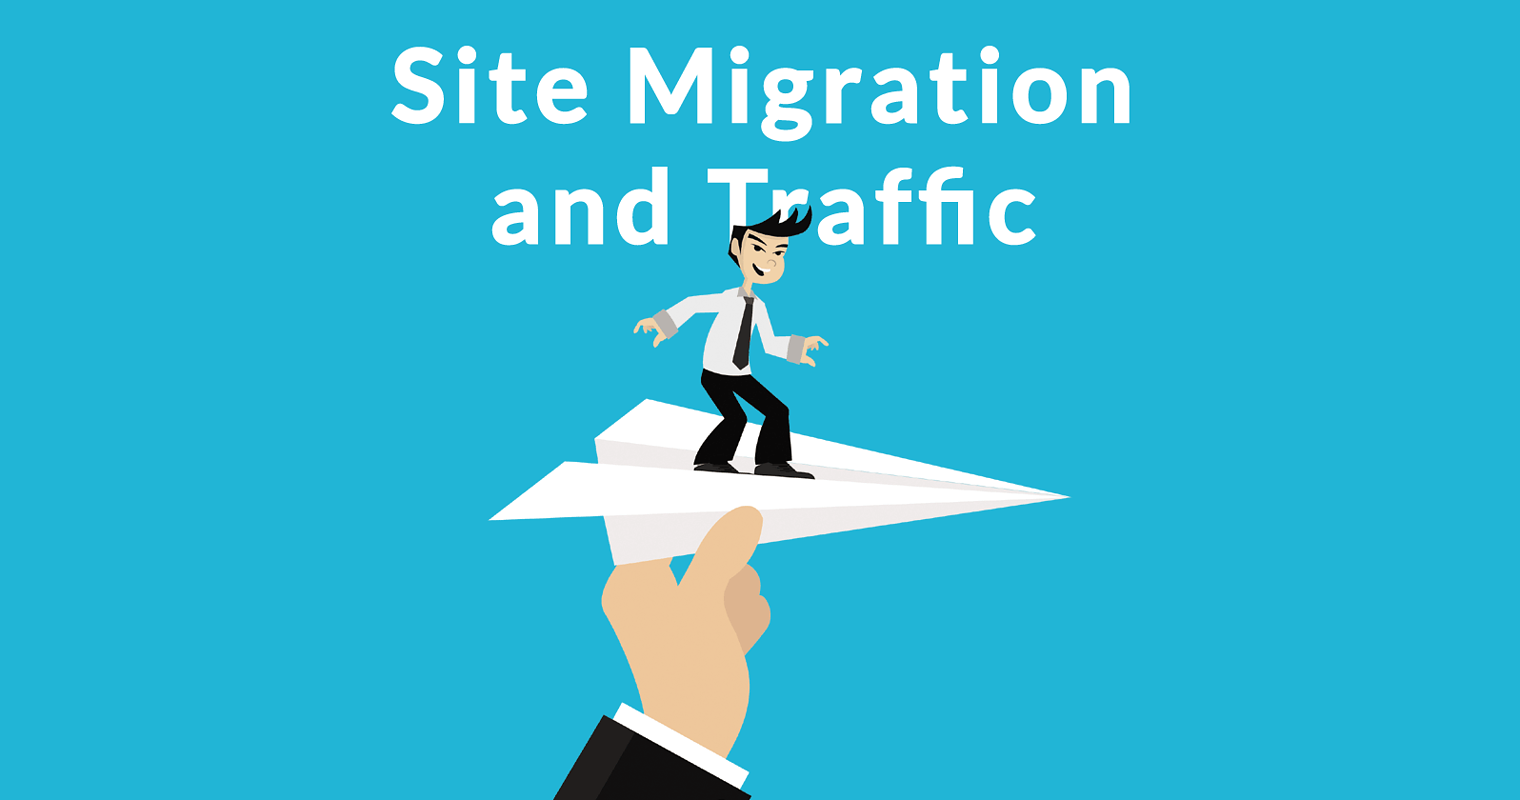 Google Explains How to Successfully Migrate Sites